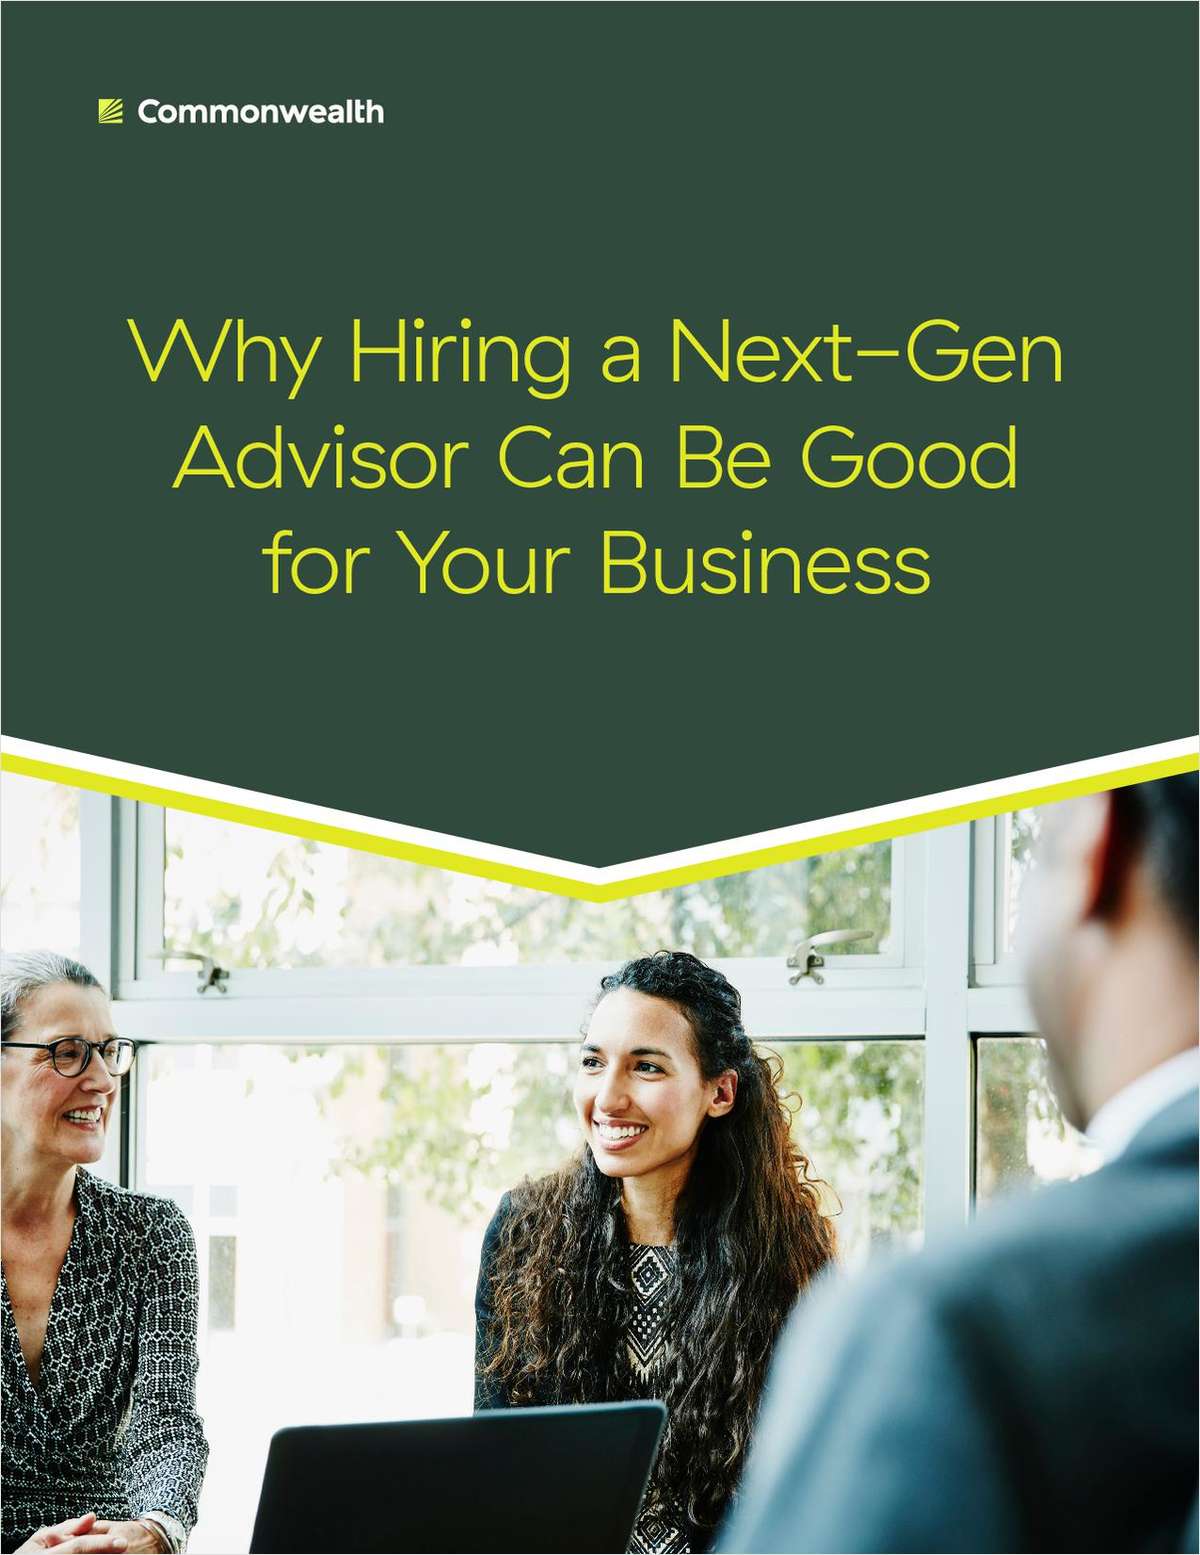 Why Hiring a Next-Gen Advisor Can Be Good for Your Business